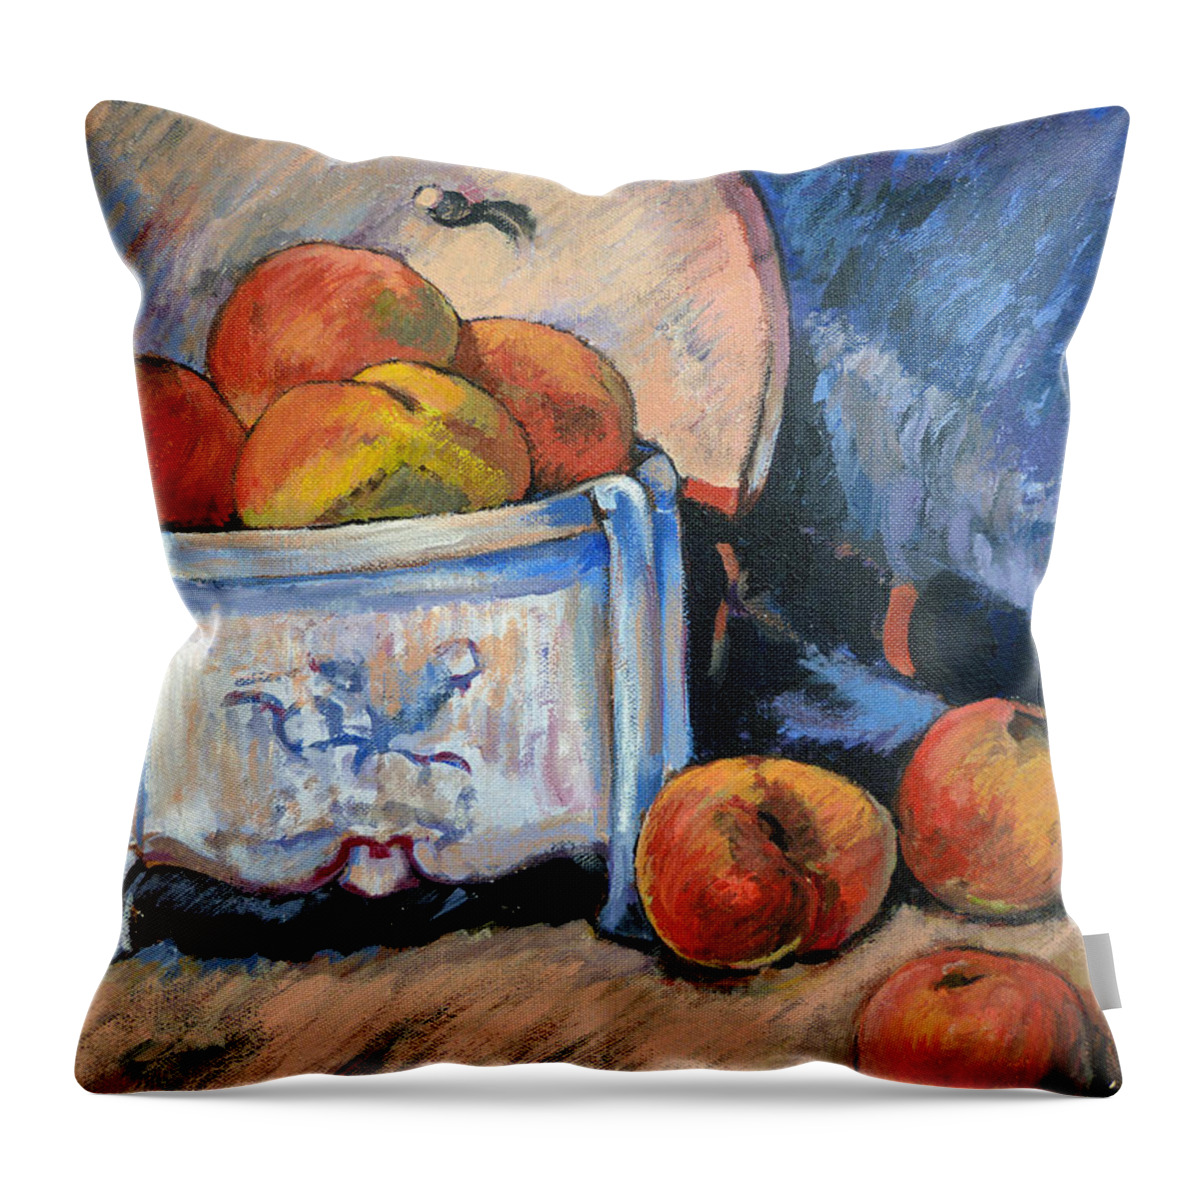 Peaches Throw Pillow featuring the painting Still Life Peaches by Tom Roderick